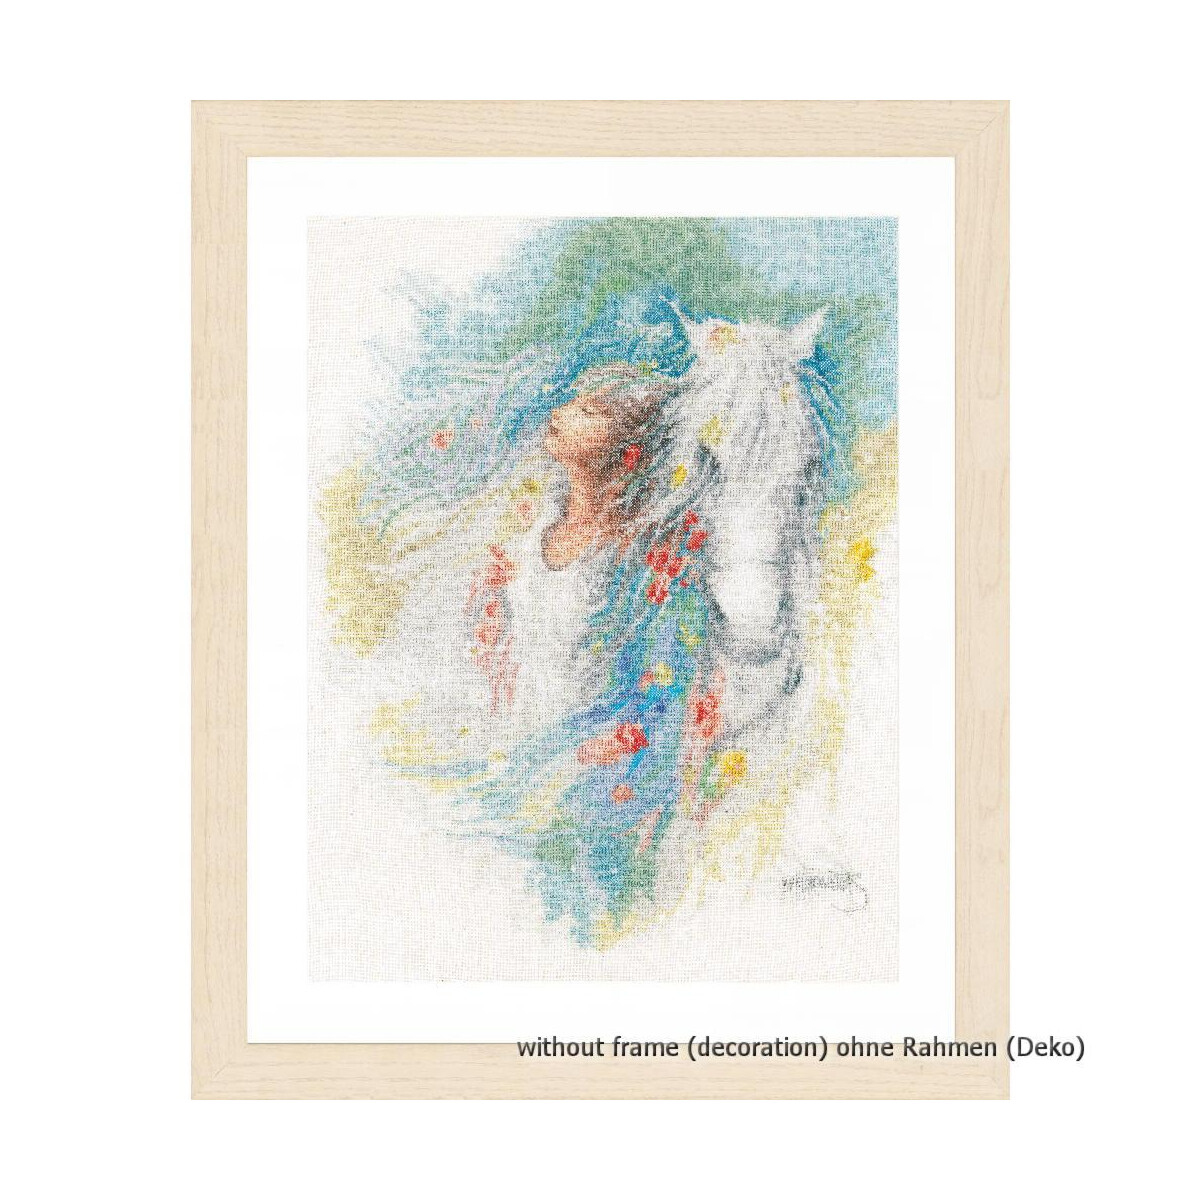 An embroidery pack from Lanarte with an impressionistic...